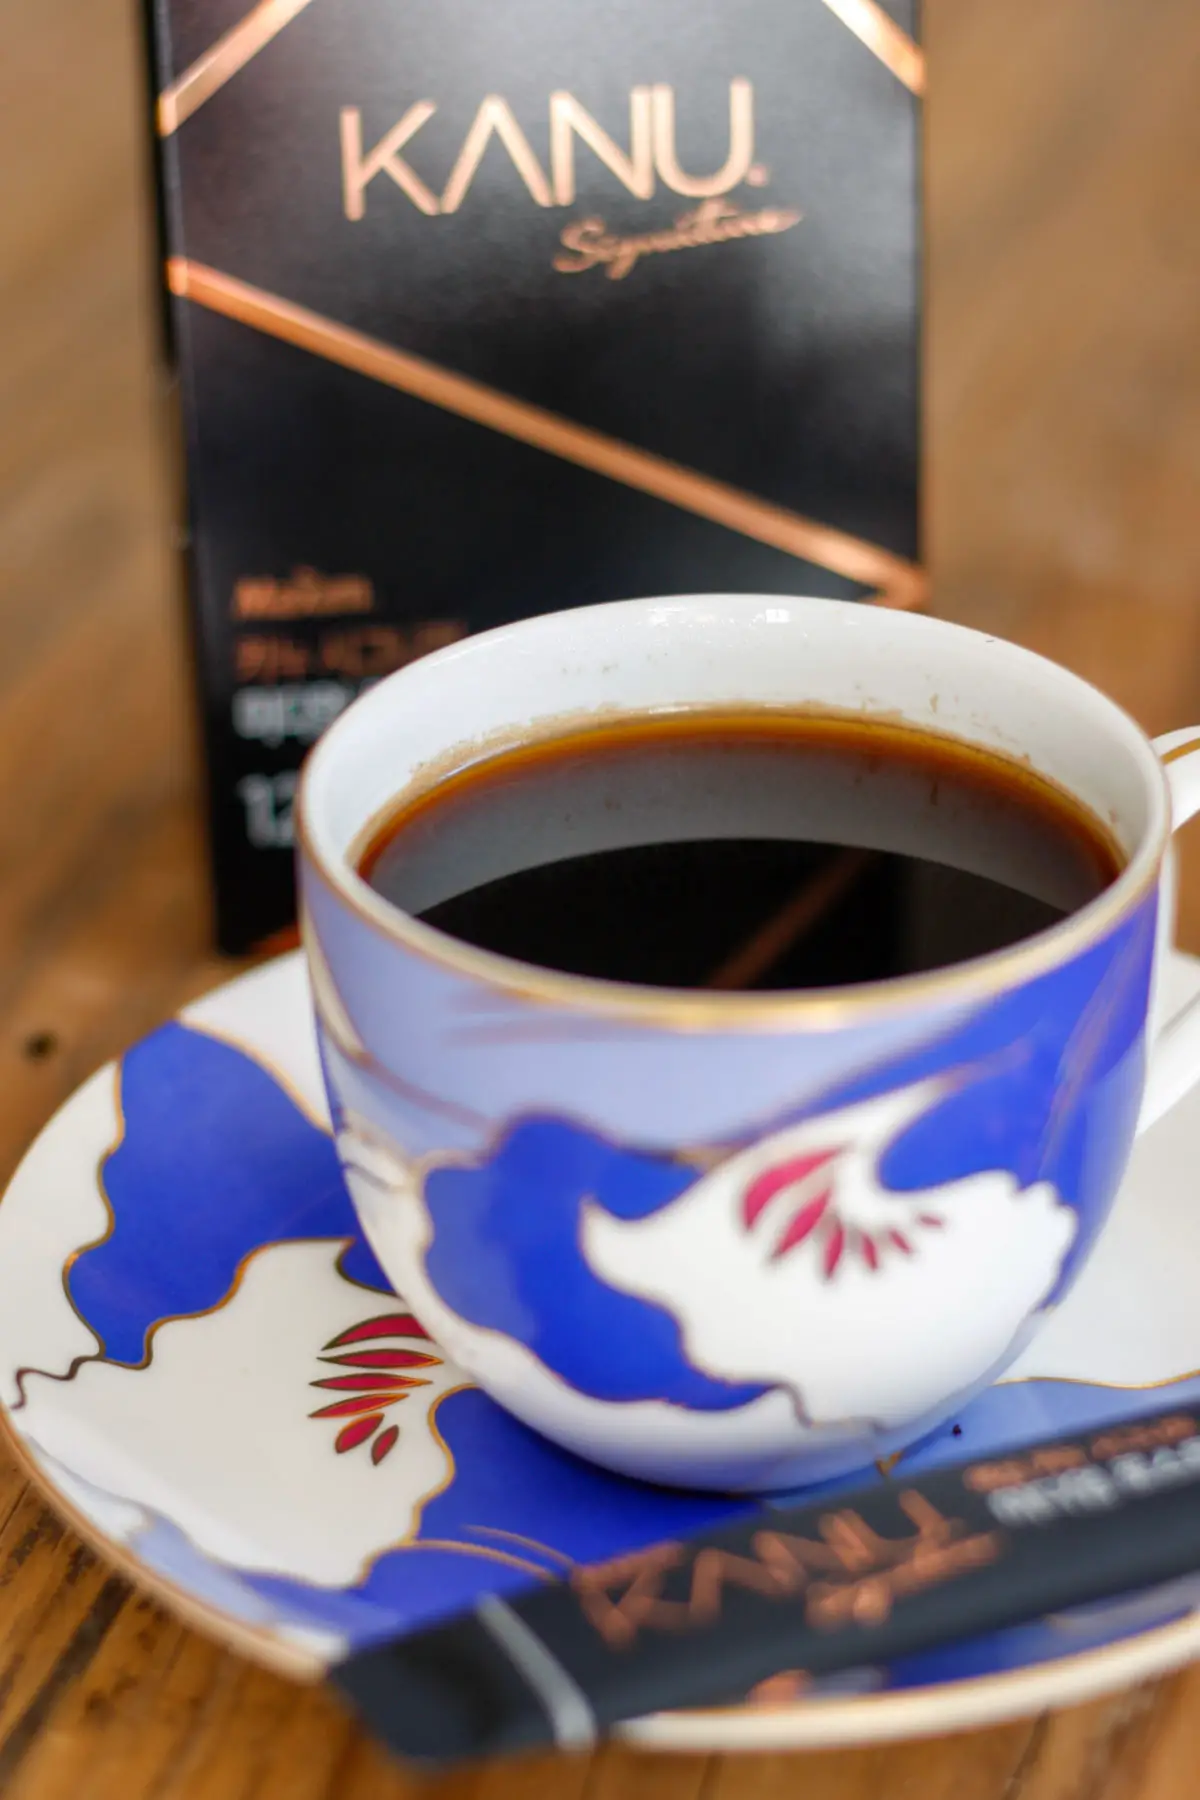 A package of Kanu Signature instant coffee in the background and and a blue patterned coffee cup with black coffee in the foreground with one of the Kanu signature coffee sticks on the plate the cup is resting on.